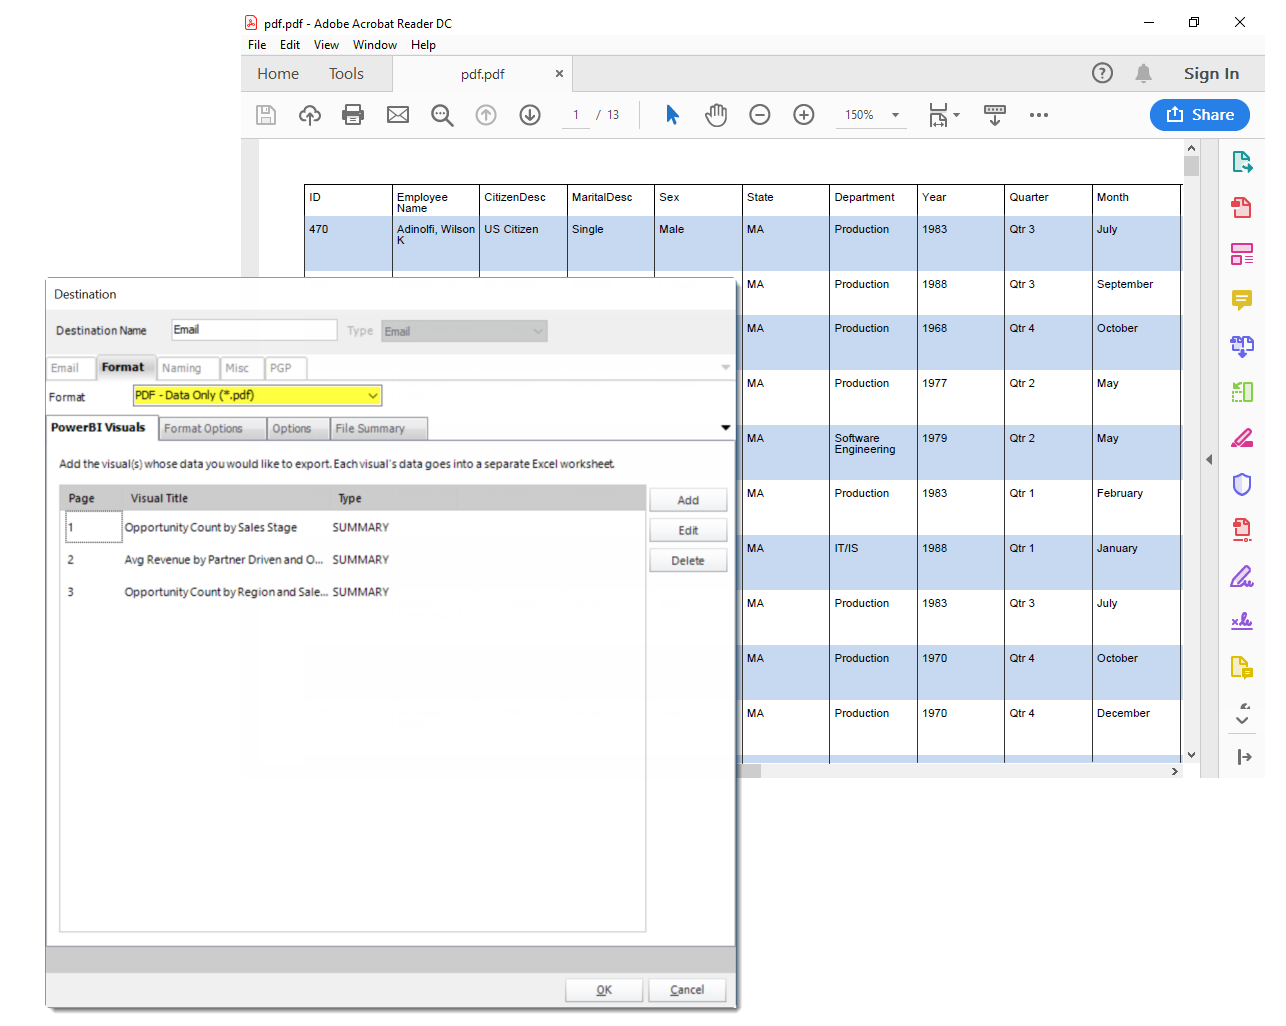 How To Export A Power BI Report To PDF With All Data